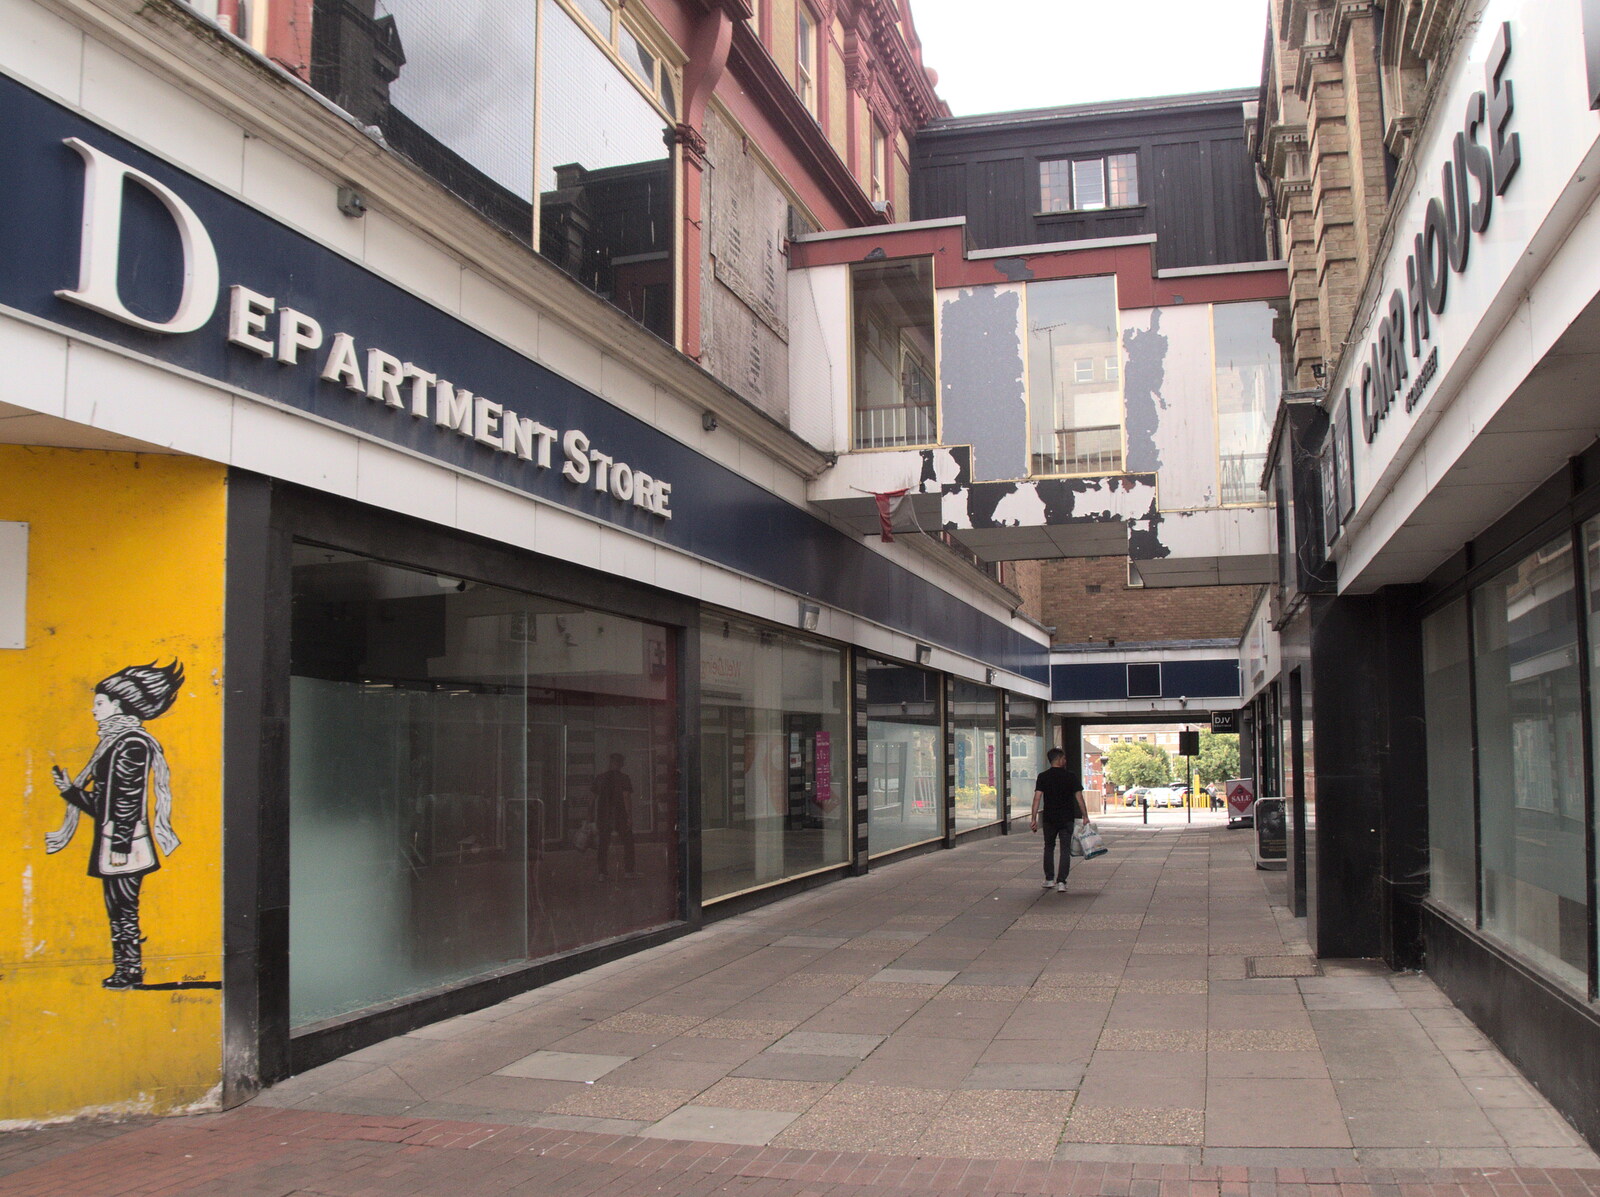 The Eye Piggy Tail Trail and Ipswich Dereliction, Suffolk - 29th July 2022: A derelict department store